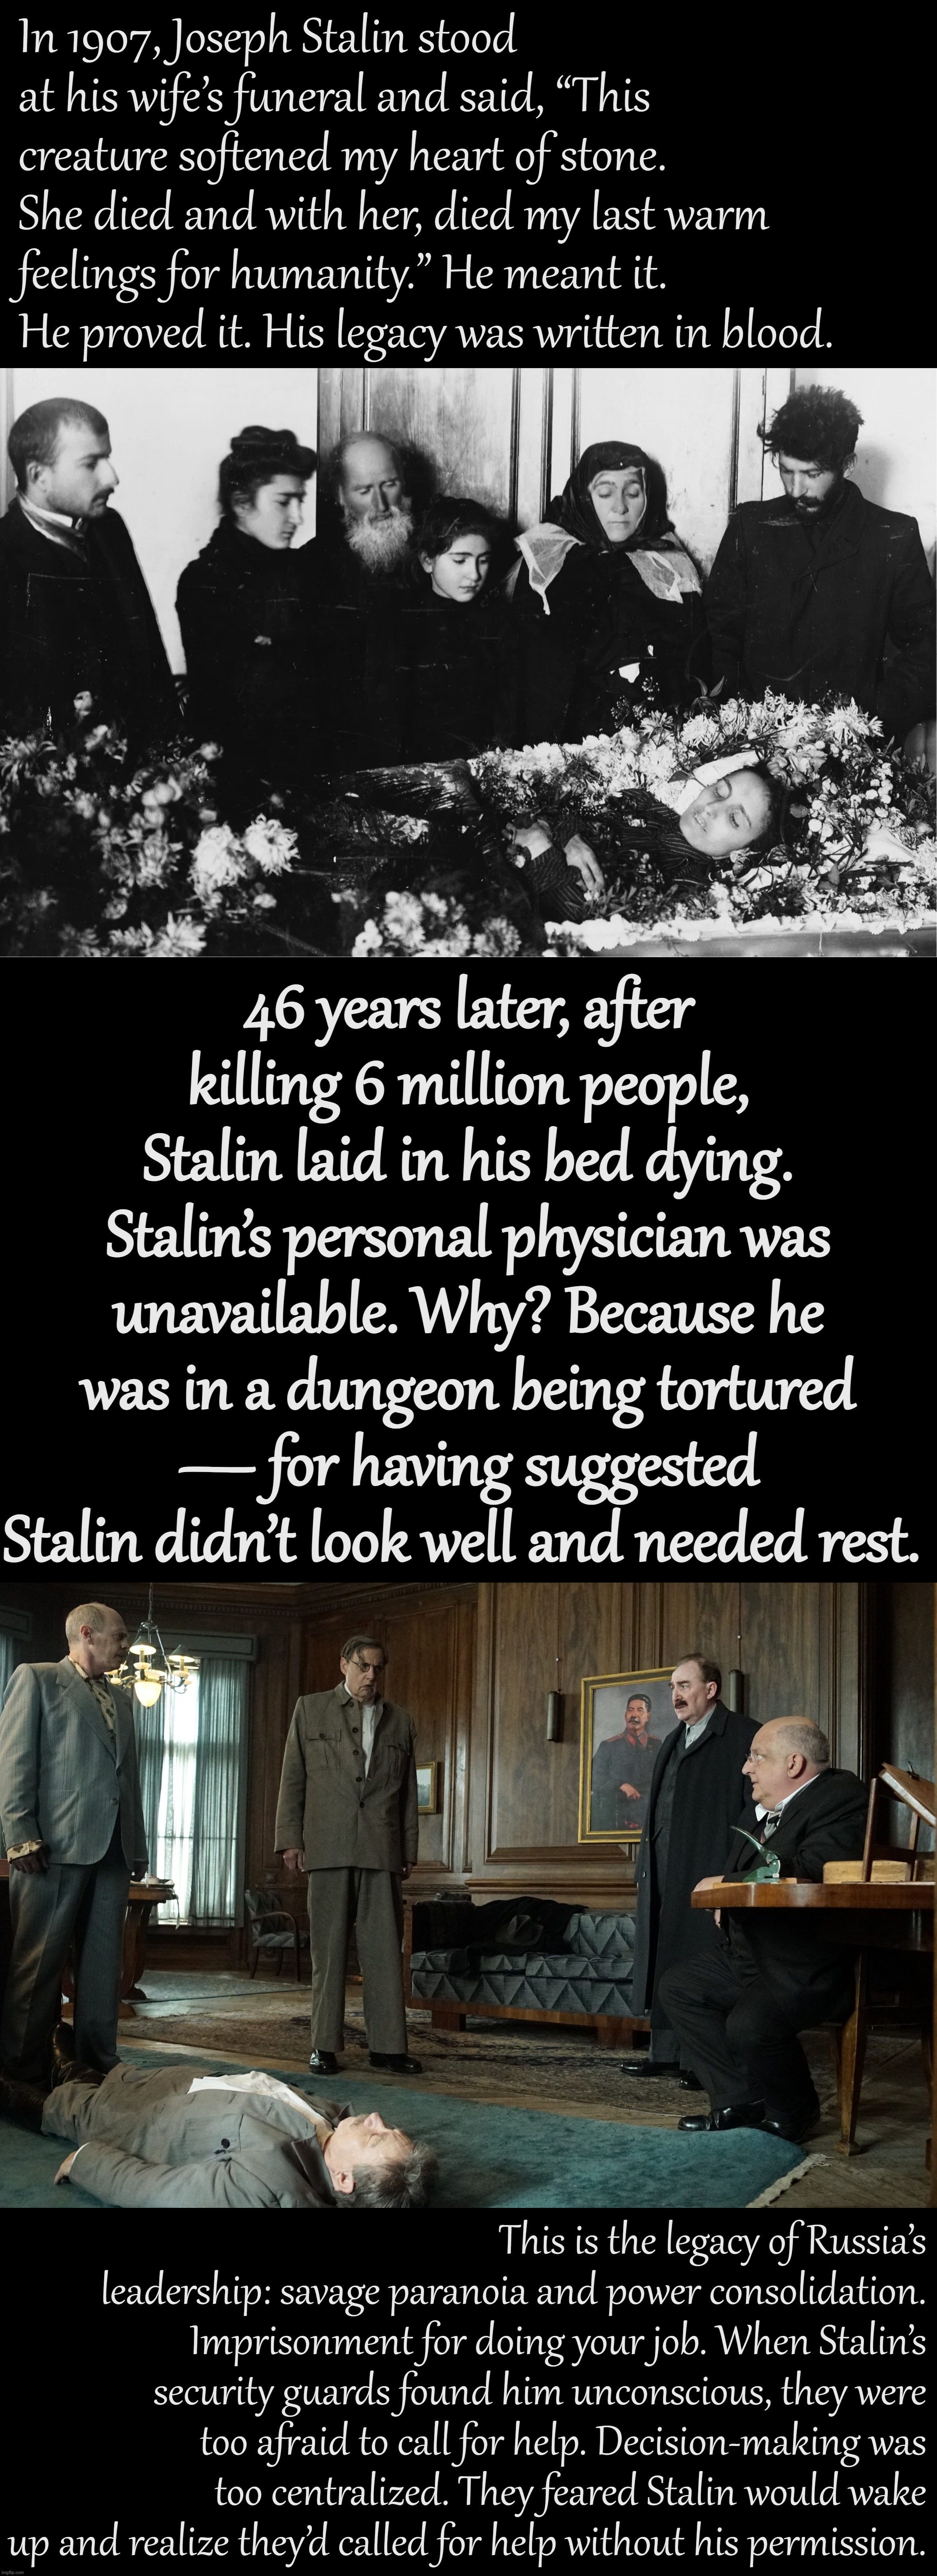 Stalin died how he lived. | In 1907, Joseph Stalin stood at his wife’s funeral and said, “This creature softened my heart of stone. She died and with her, died my last warm feelings for humanity.” He meant it. He proved it. His legacy was written in blood. 46 years later, after killing 6 million people, Stalin laid in his bed dying. Stalin’s personal physician was unavailable. Why? Because he was in a dungeon being tortured — for having suggested Stalin didn’t look well and needed rest. This is the legacy of Russia’s leadership: savage paranoia and power consolidation. Imprisonment for doing your job. When Stalin’s security guards found him unconscious, they were too afraid to call for help. Decision-making was too centralized. They feared Stalin would wake up and realize they’d called for help without his permission. | image tagged in stalin at wife's funeral 1907,death of stalin,stalin,joseph stalin,soviet russia,in soviet russia | made w/ Imgflip meme maker